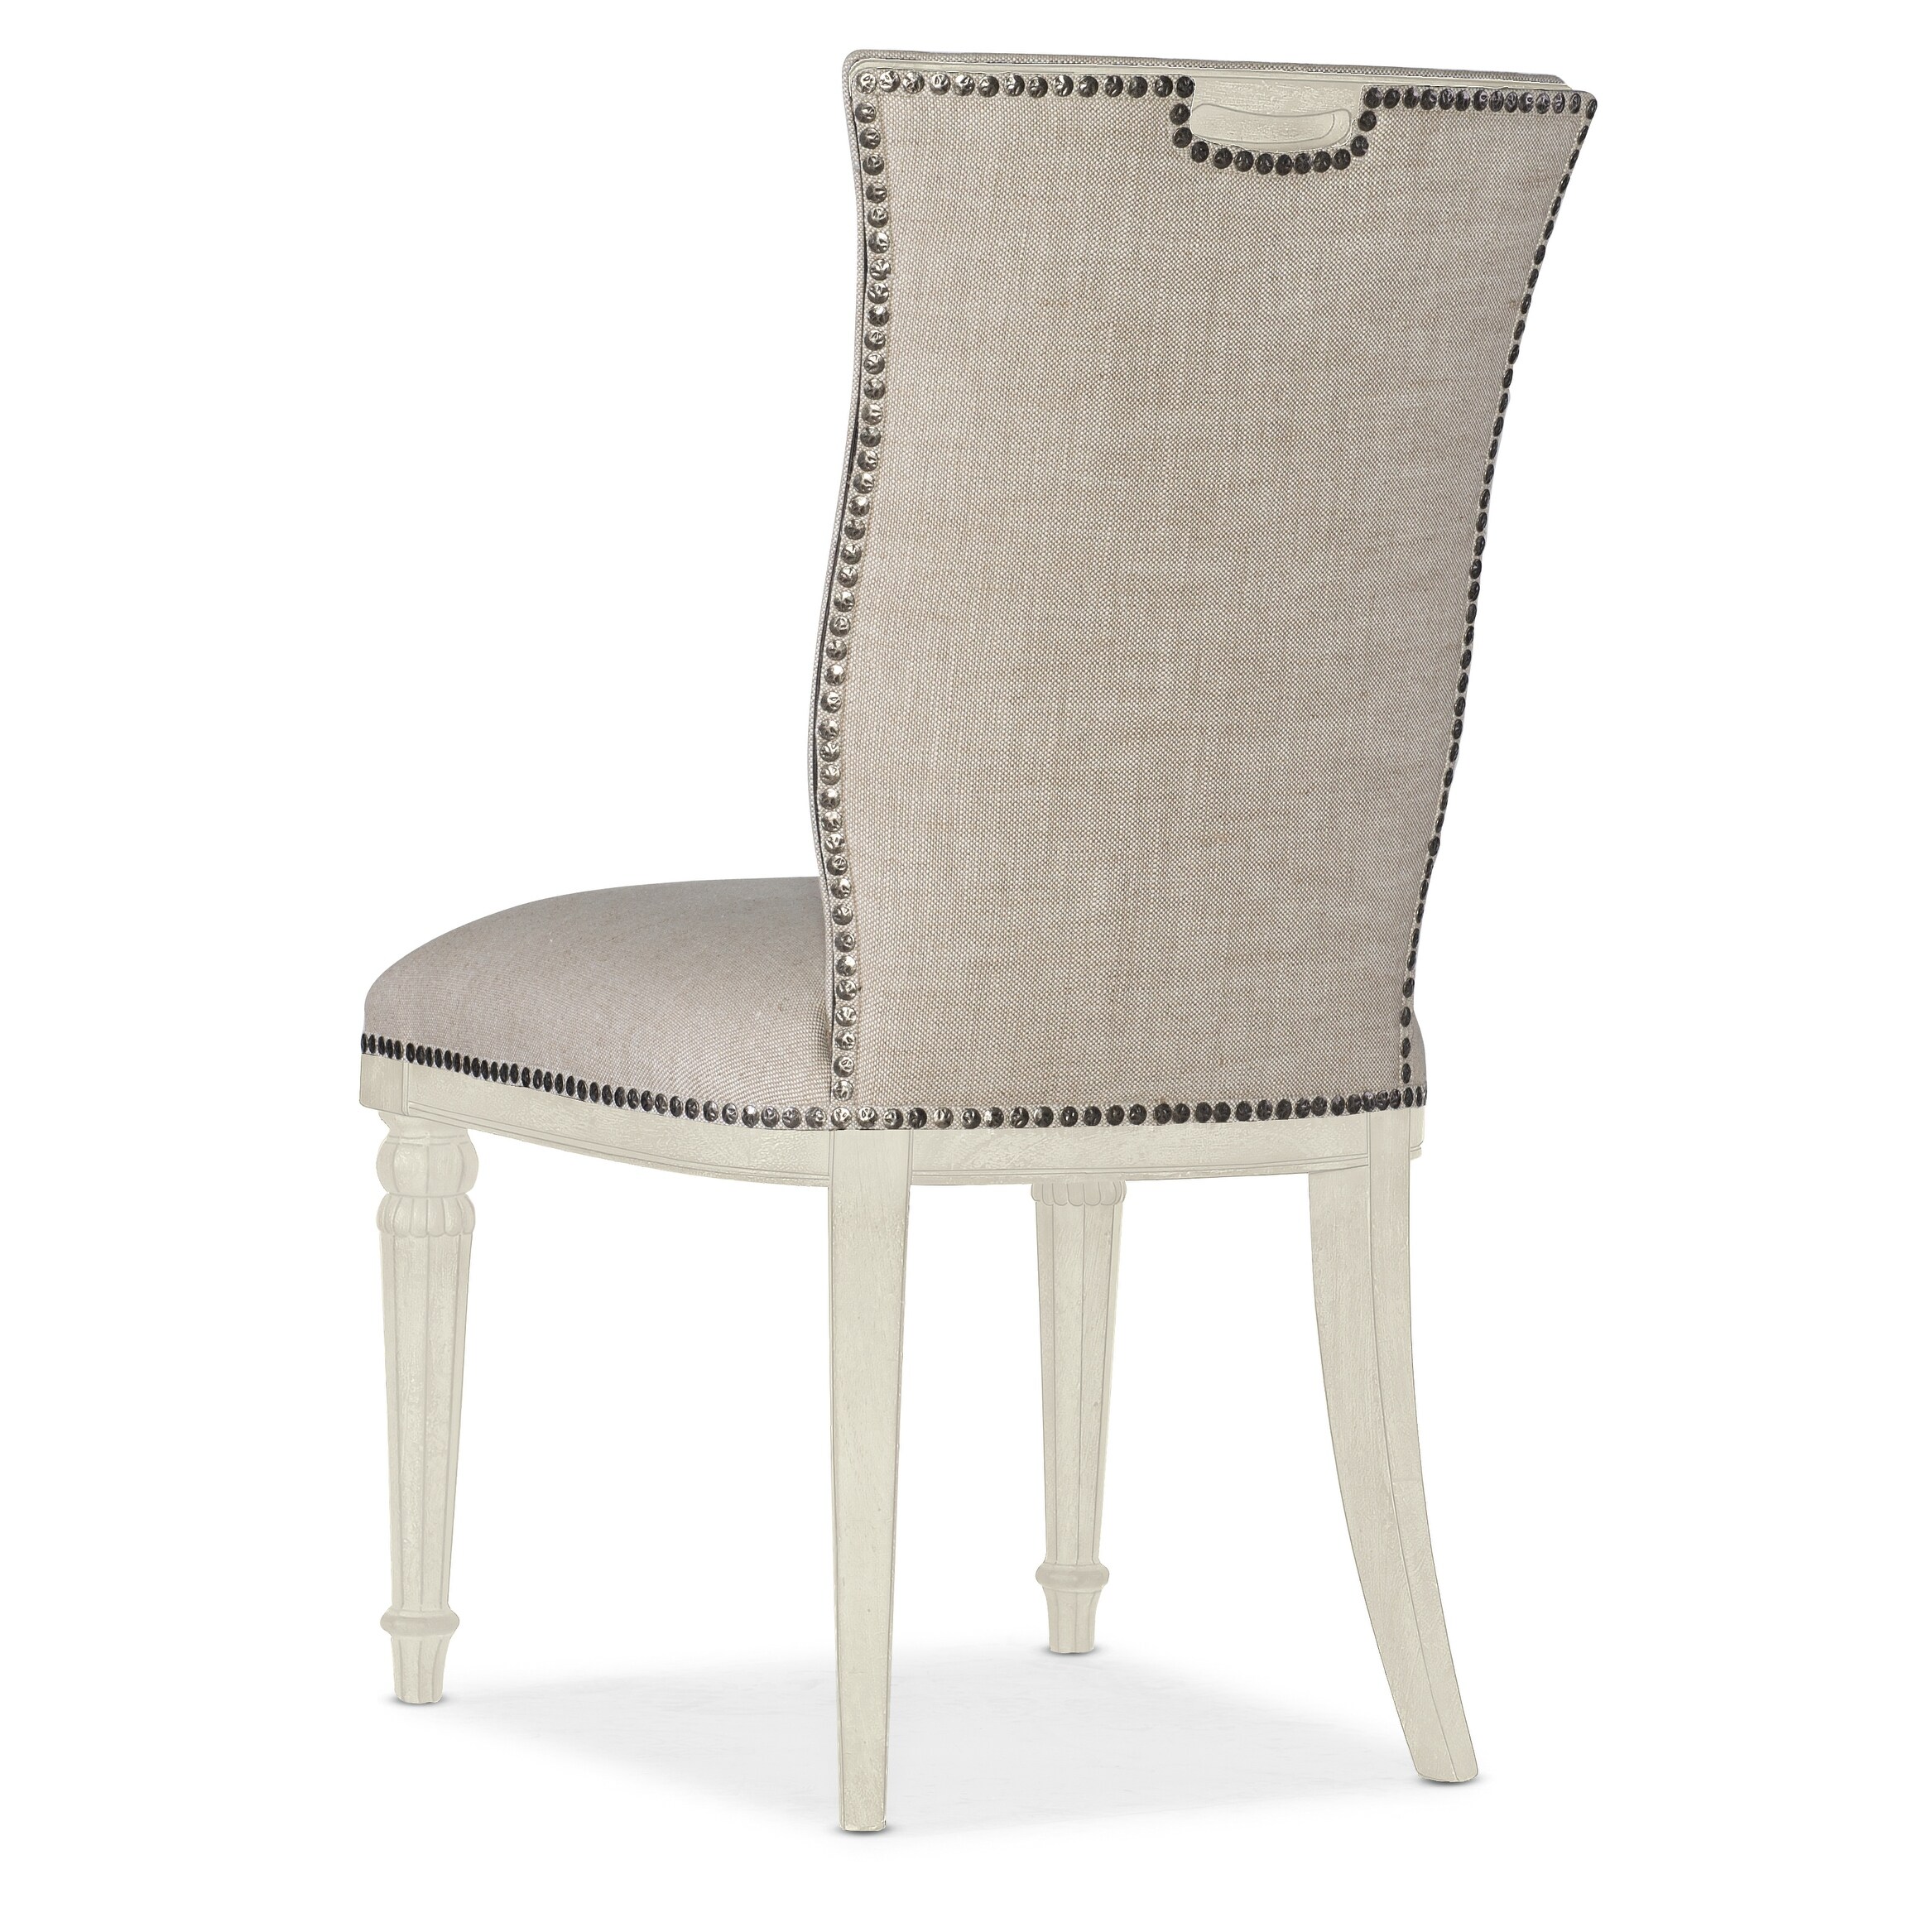 Traditions Upholstered Side Chair, Magnolia - 22"W x 38.25"H x 25.5"D